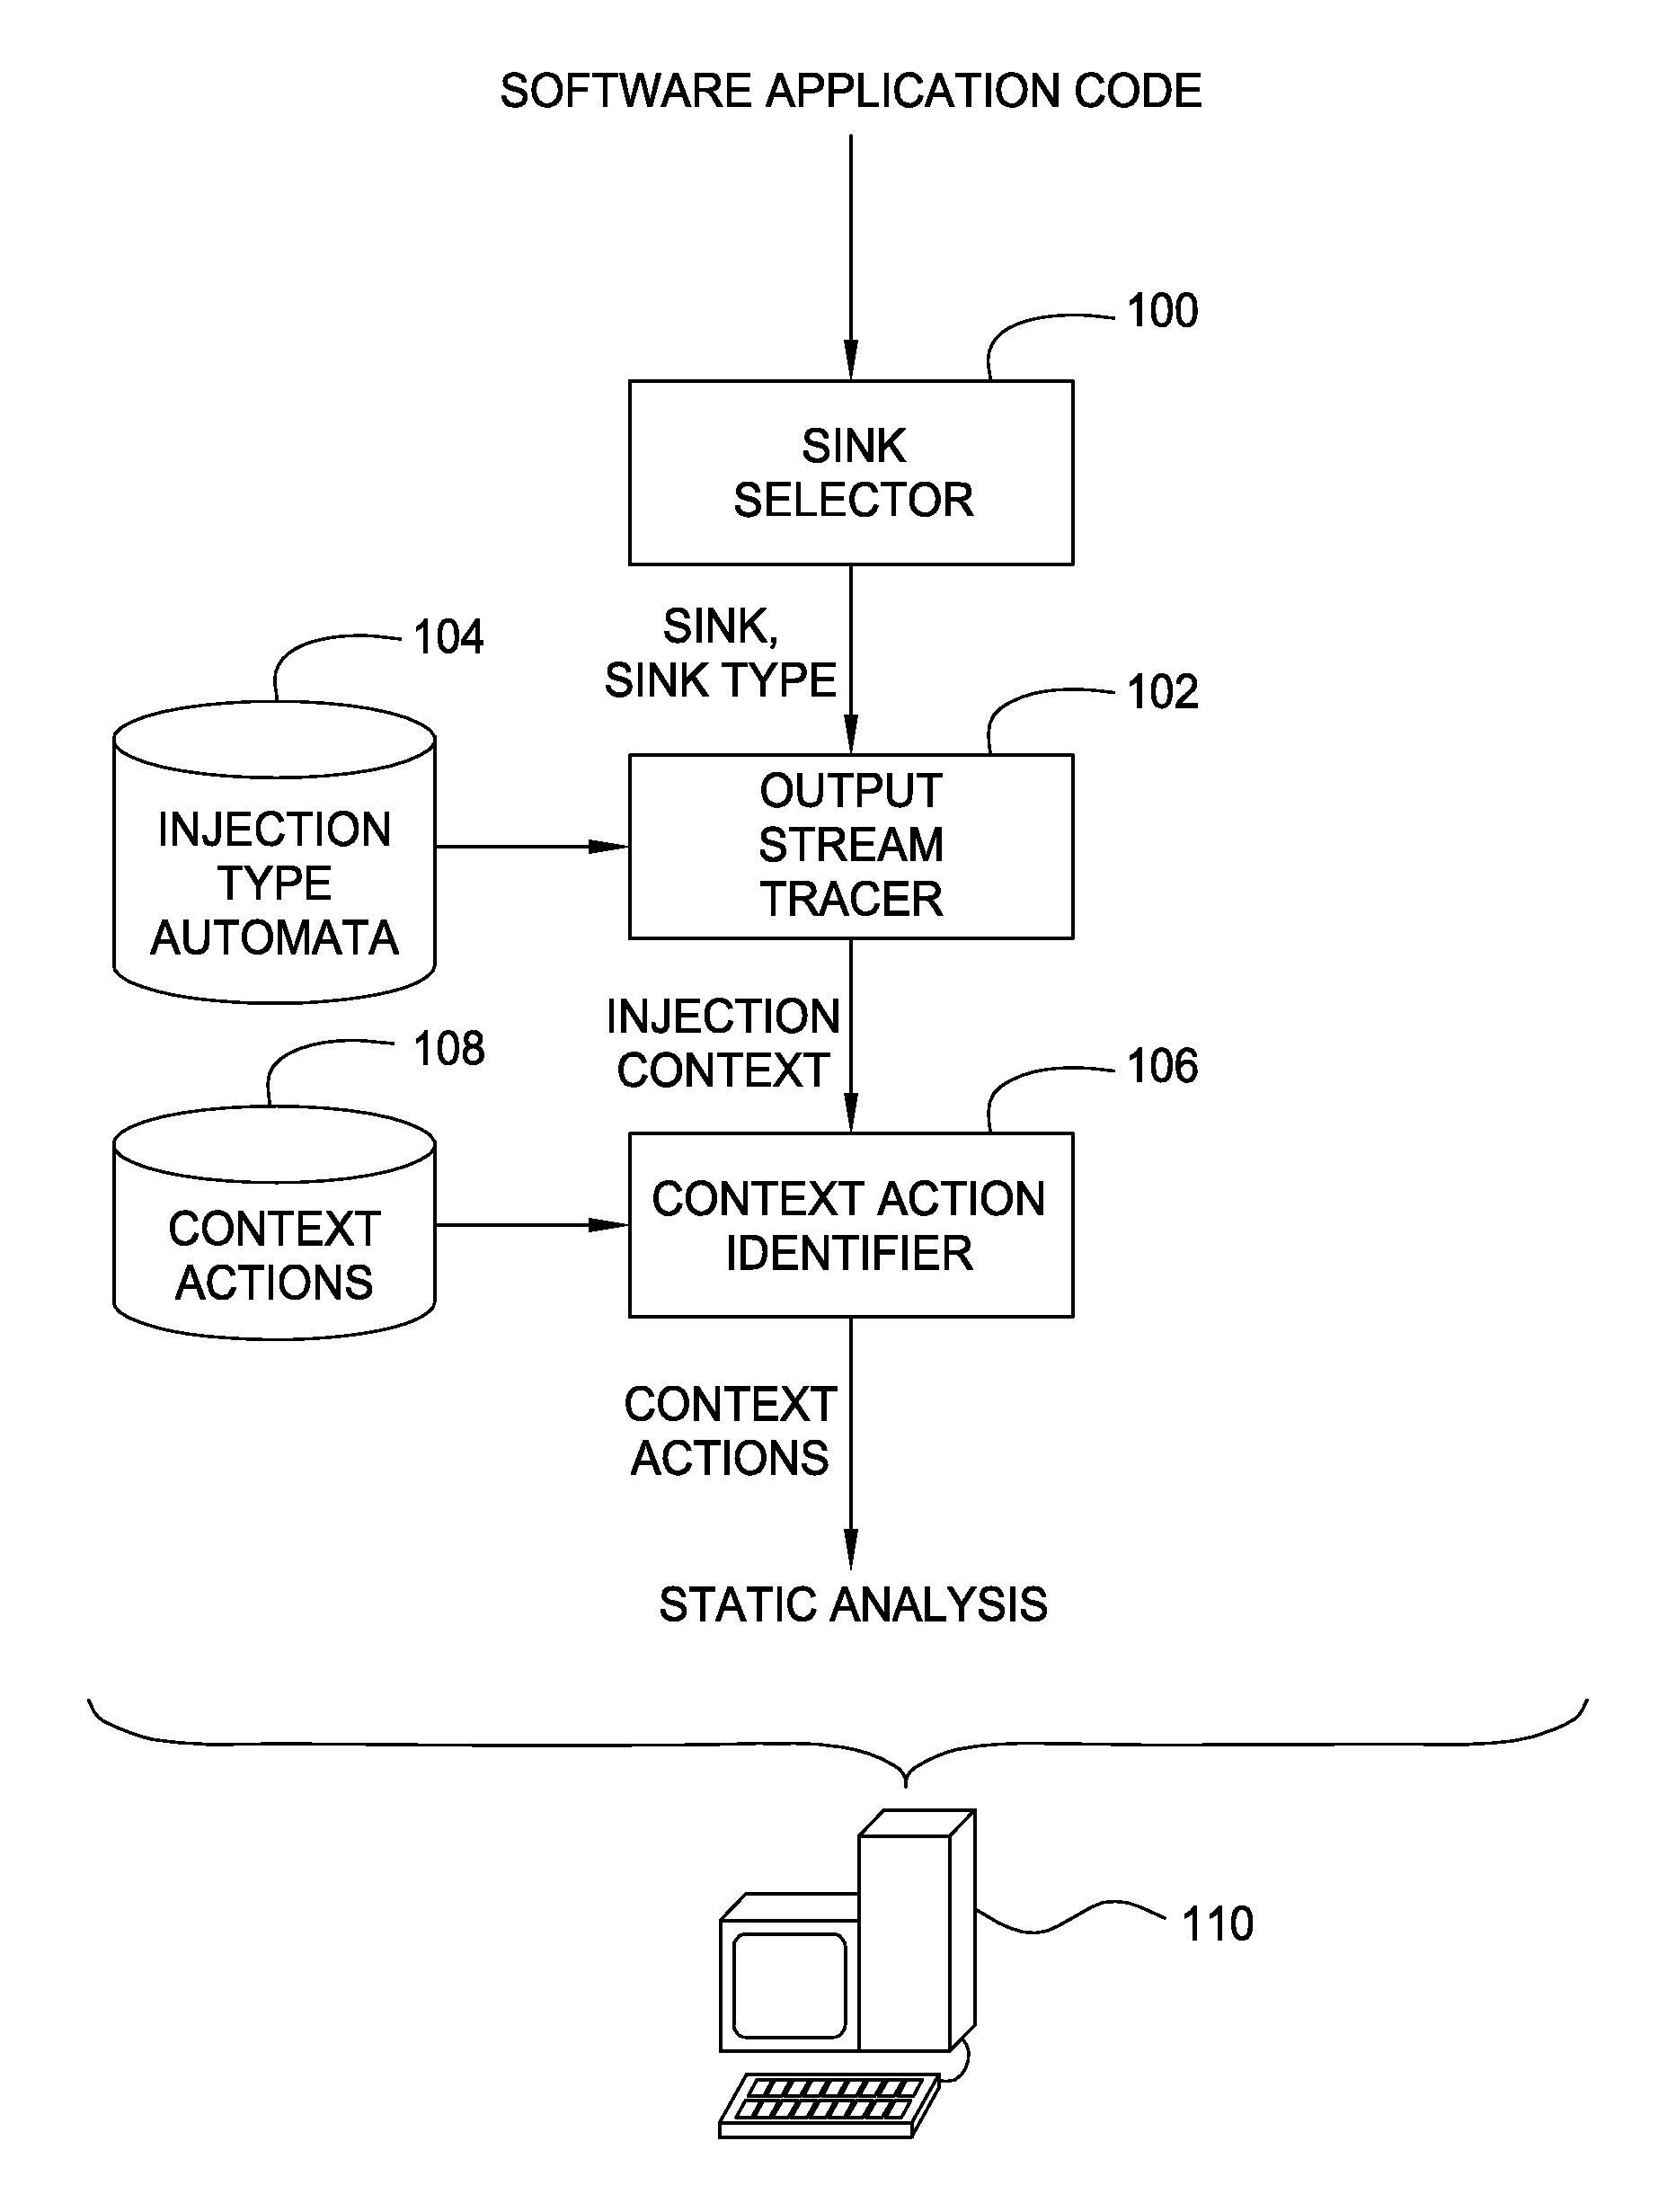 Injection context based static analysis of computer software applications